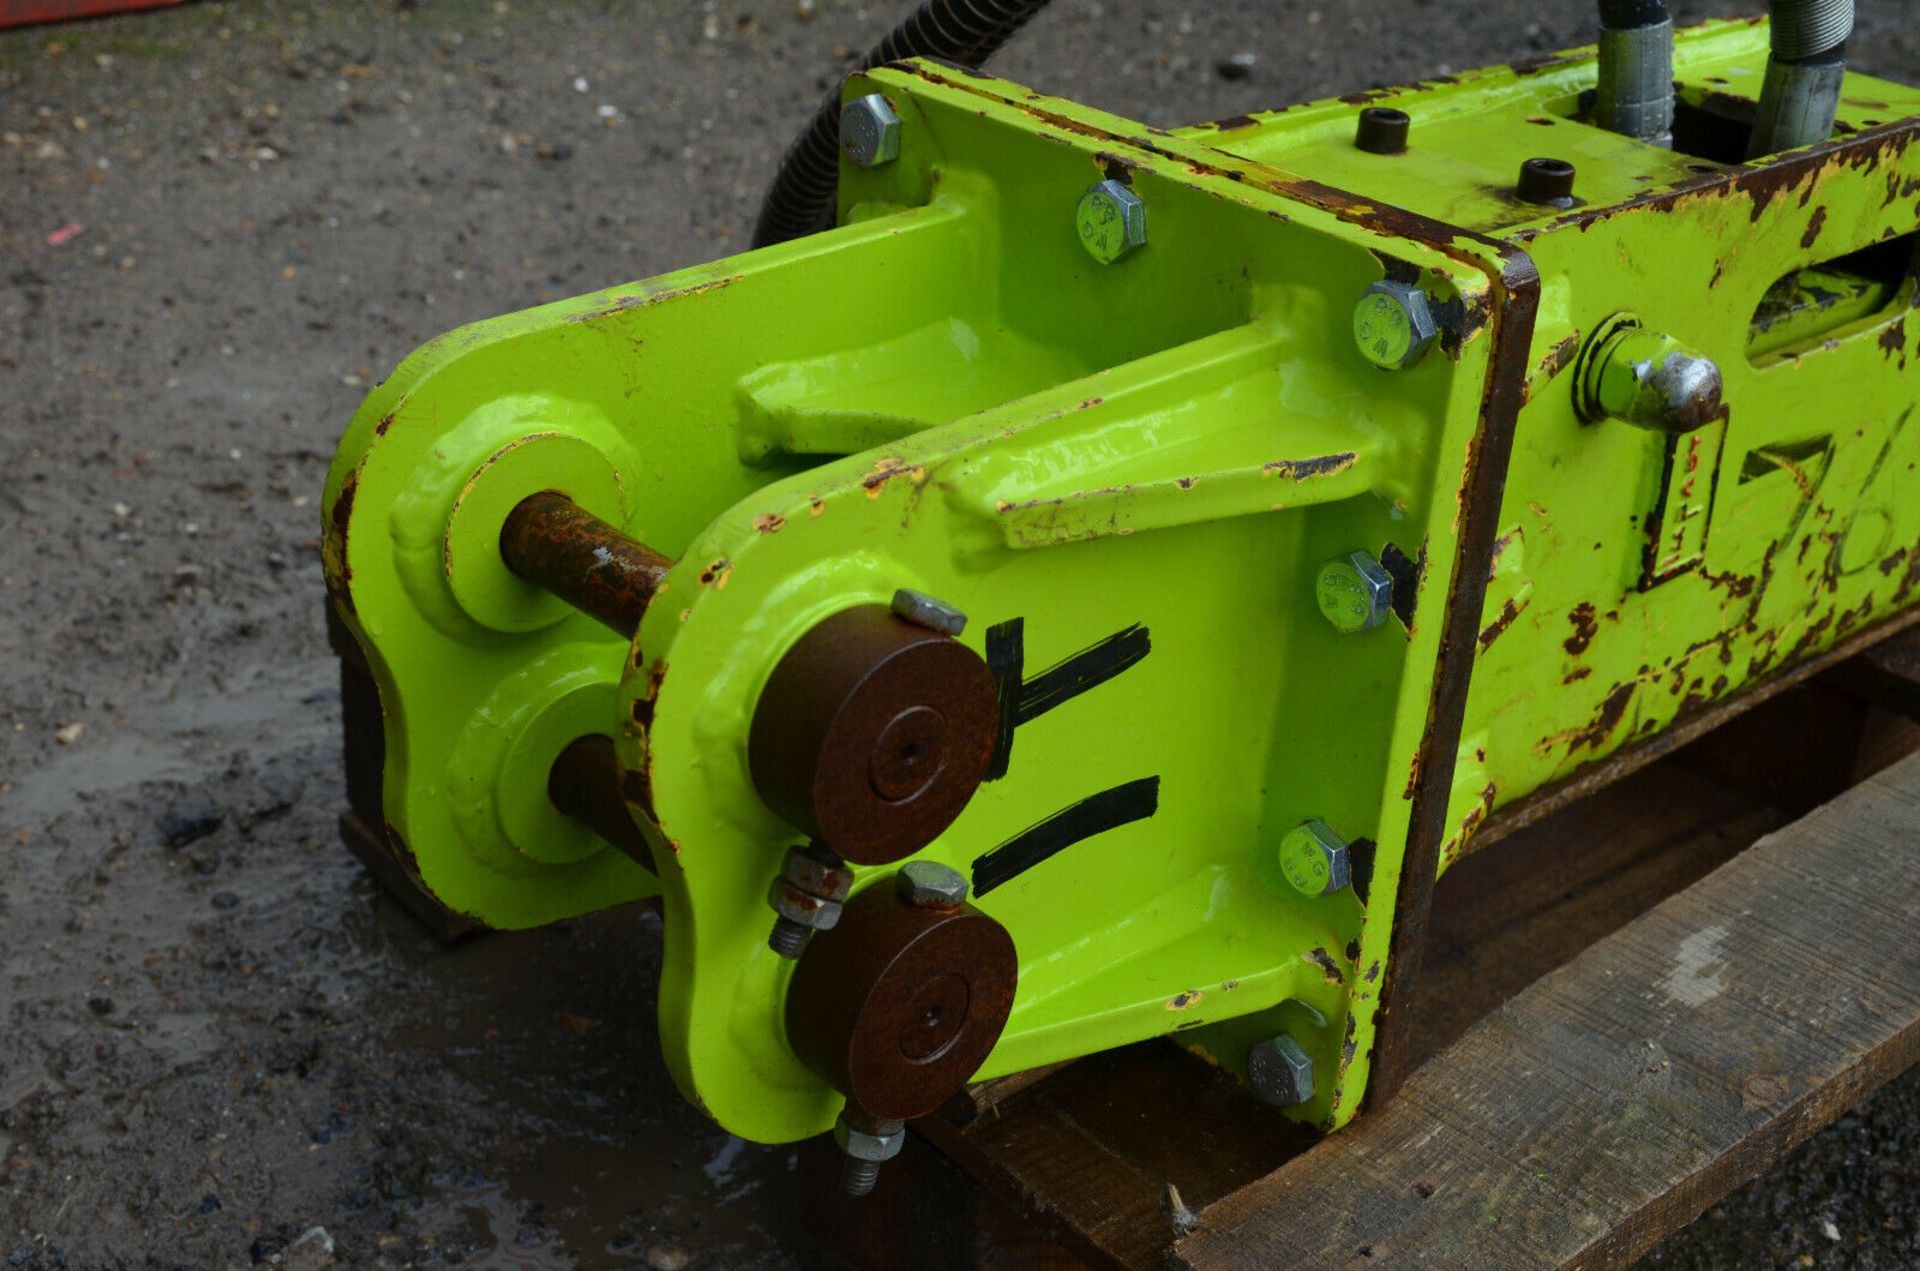 Hydraulic hammer/breaker for excavator digger 3494 - Image 7 of 8